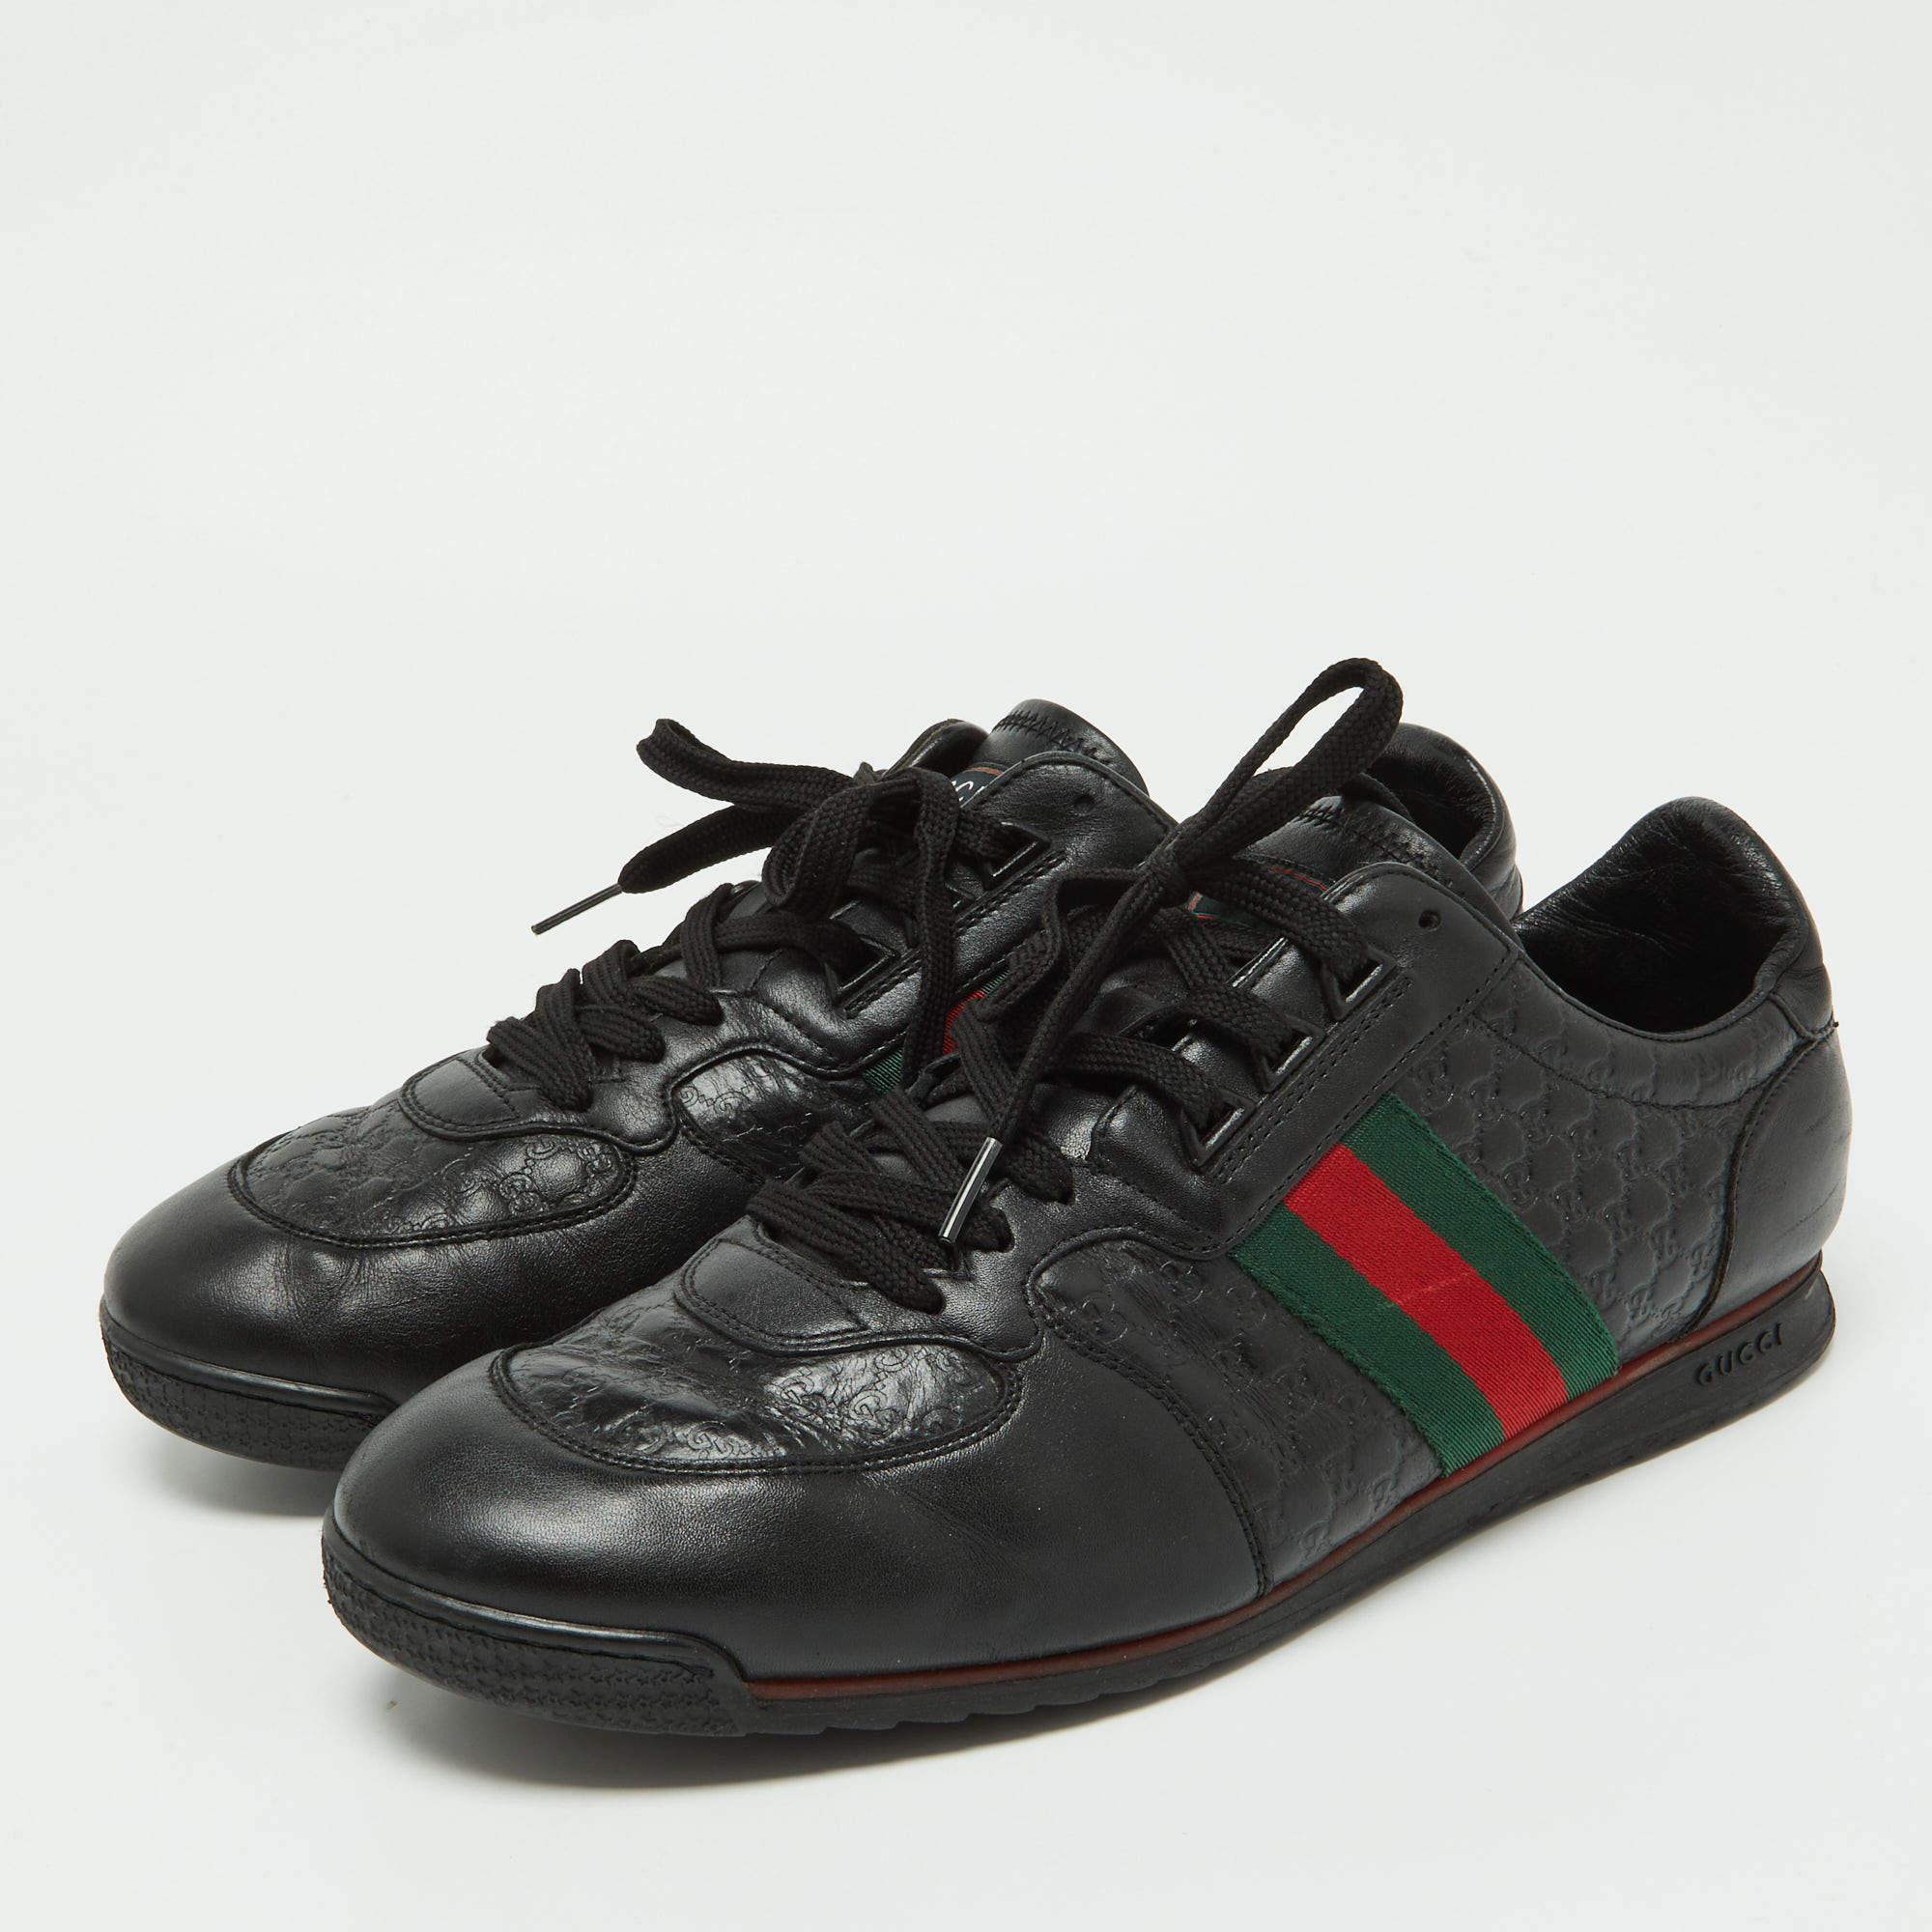 Gucci Black Leather Web Lace Up Sneakers Size 45.5 1